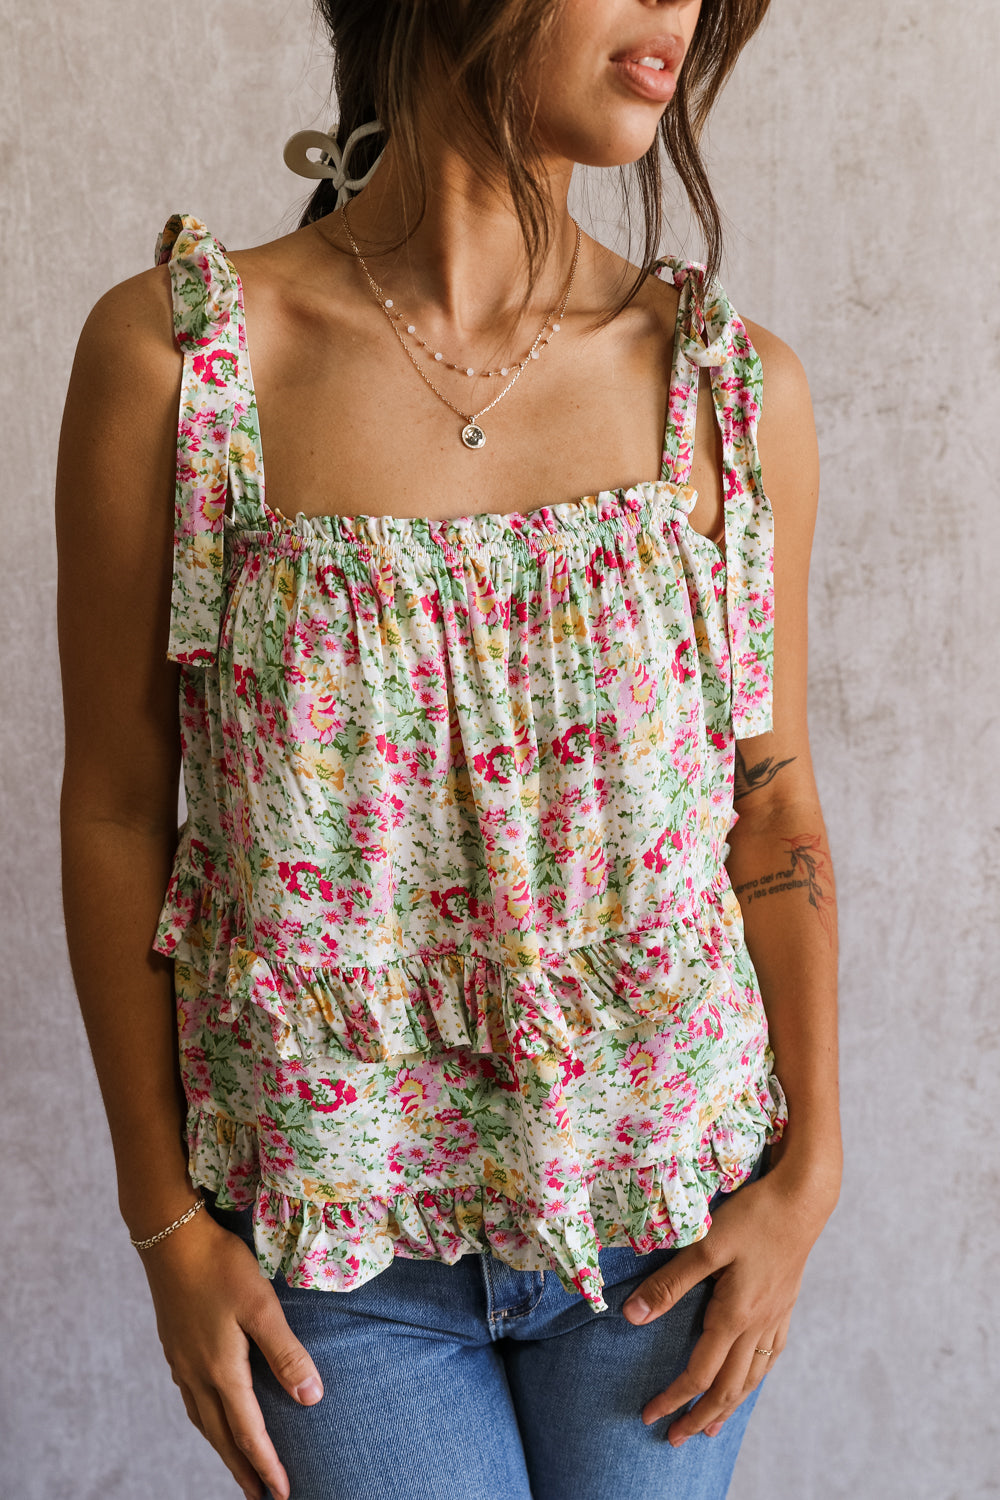 CLose up view of female model wearing the Florence Pink Multi Floral Tie Strap Tank which features features Pink, Yellow, Green and White Floral Print, Ruffle Tiered Details, Square Neckline and Tie Straps